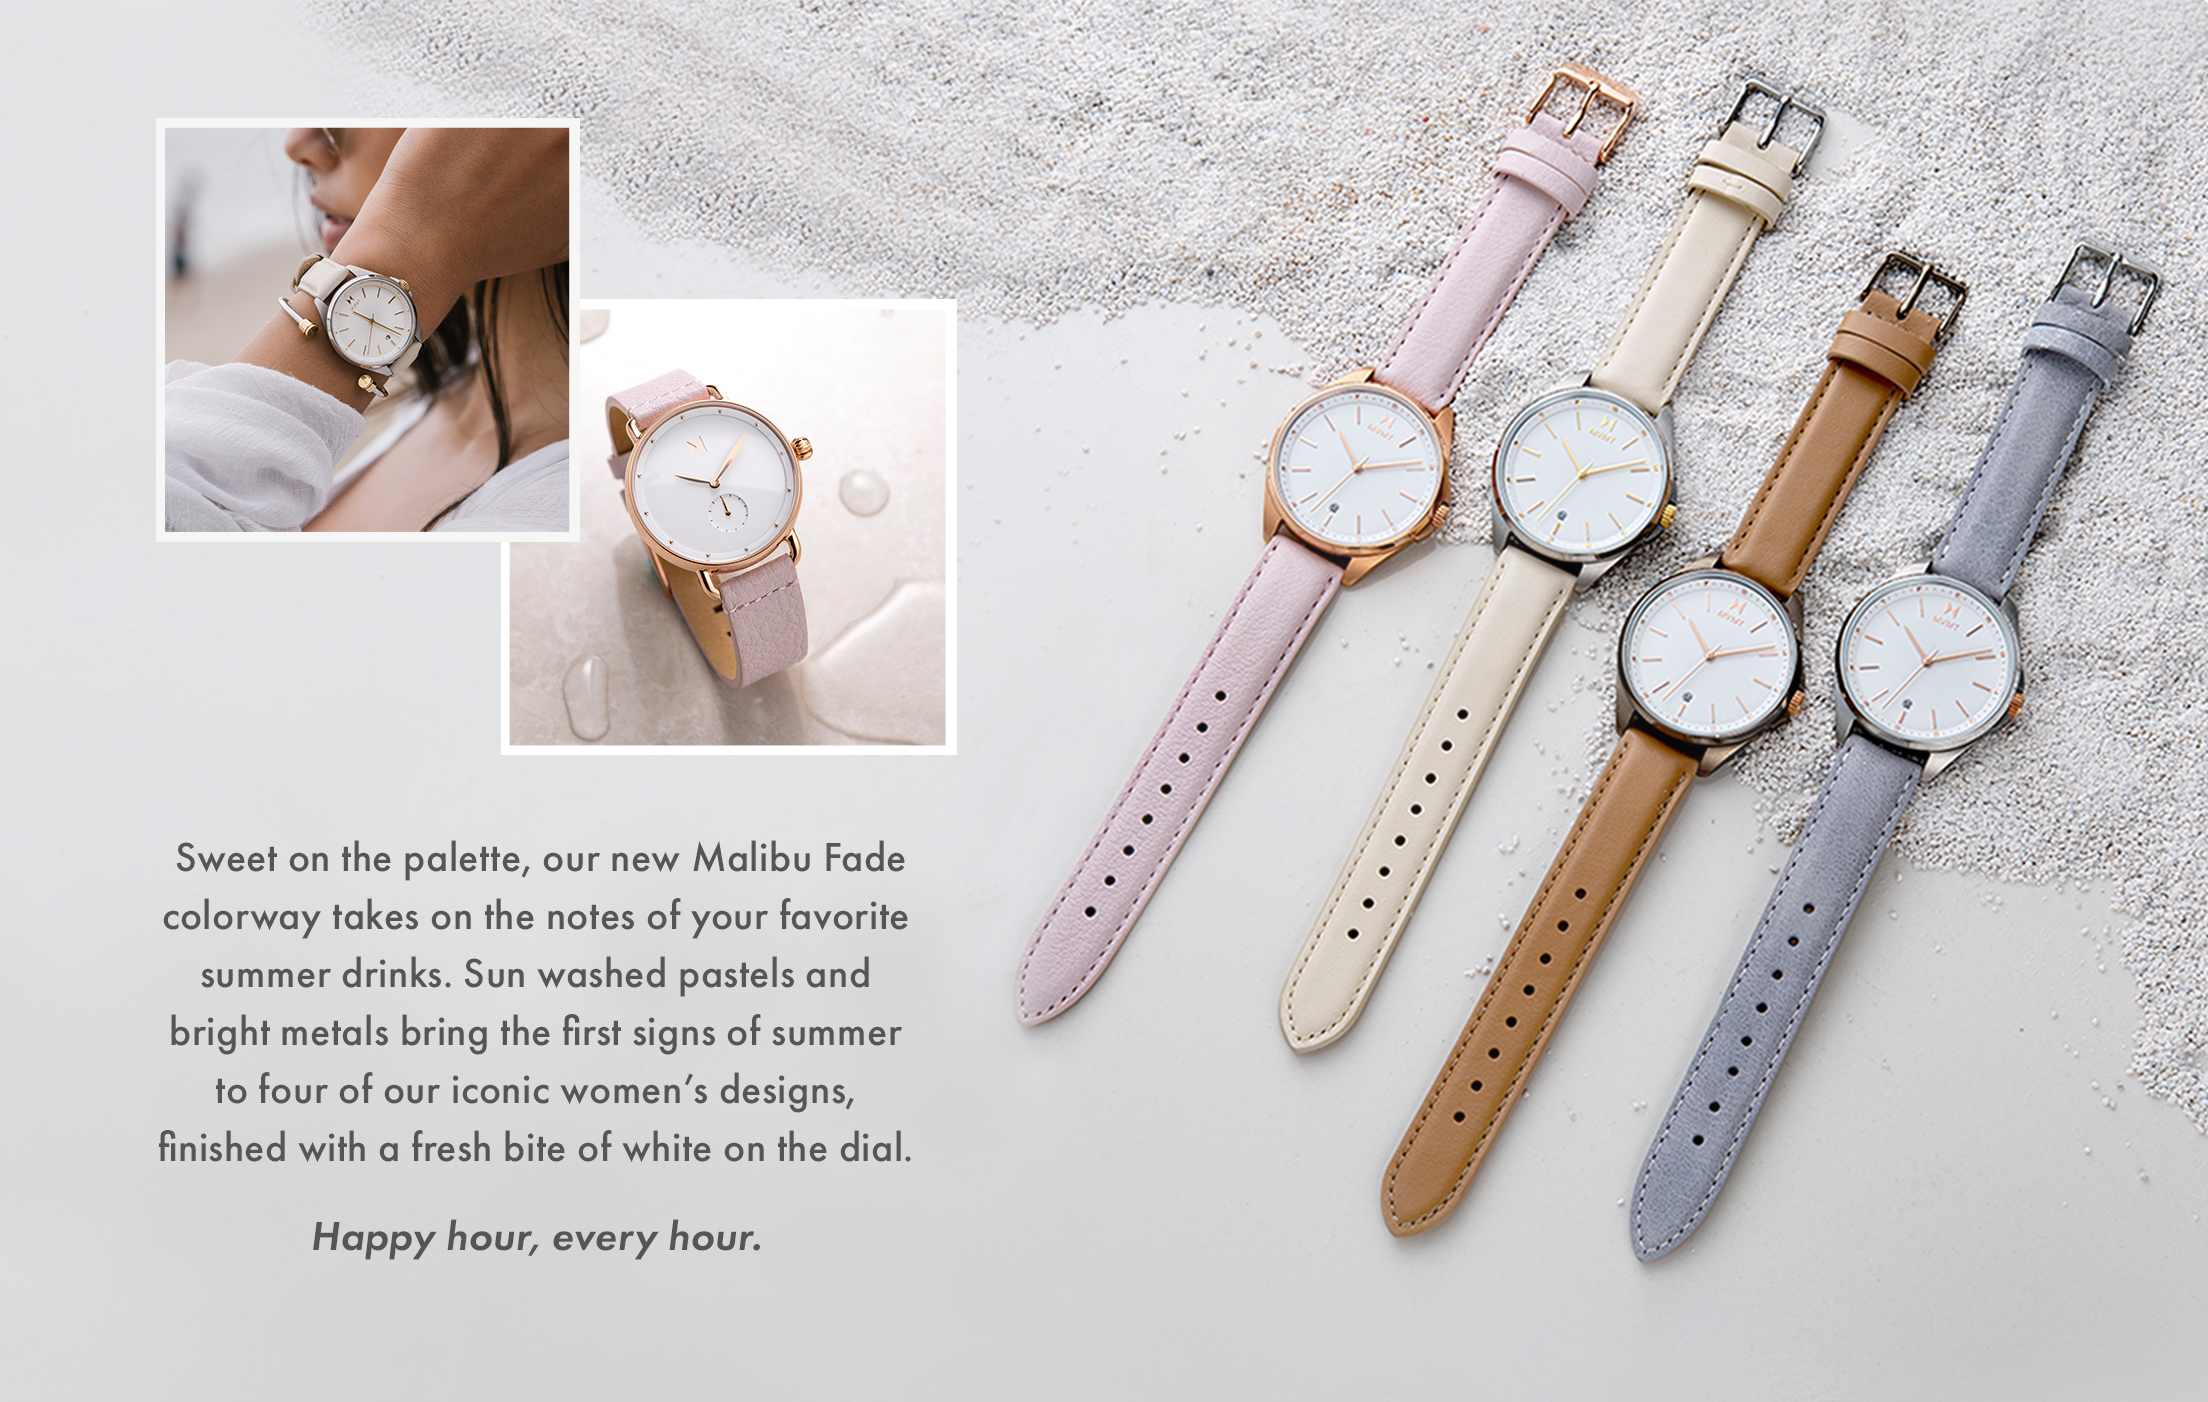 Sweet on the palette, our new Malibu Fade colorway takes on the notes of your favorite summer drinks. Sun washed pastels and bright metals bring the first signs of summer to four of our iconic women's designs, finished with a fresh bite of white on the dial. Happy hour, every hour.